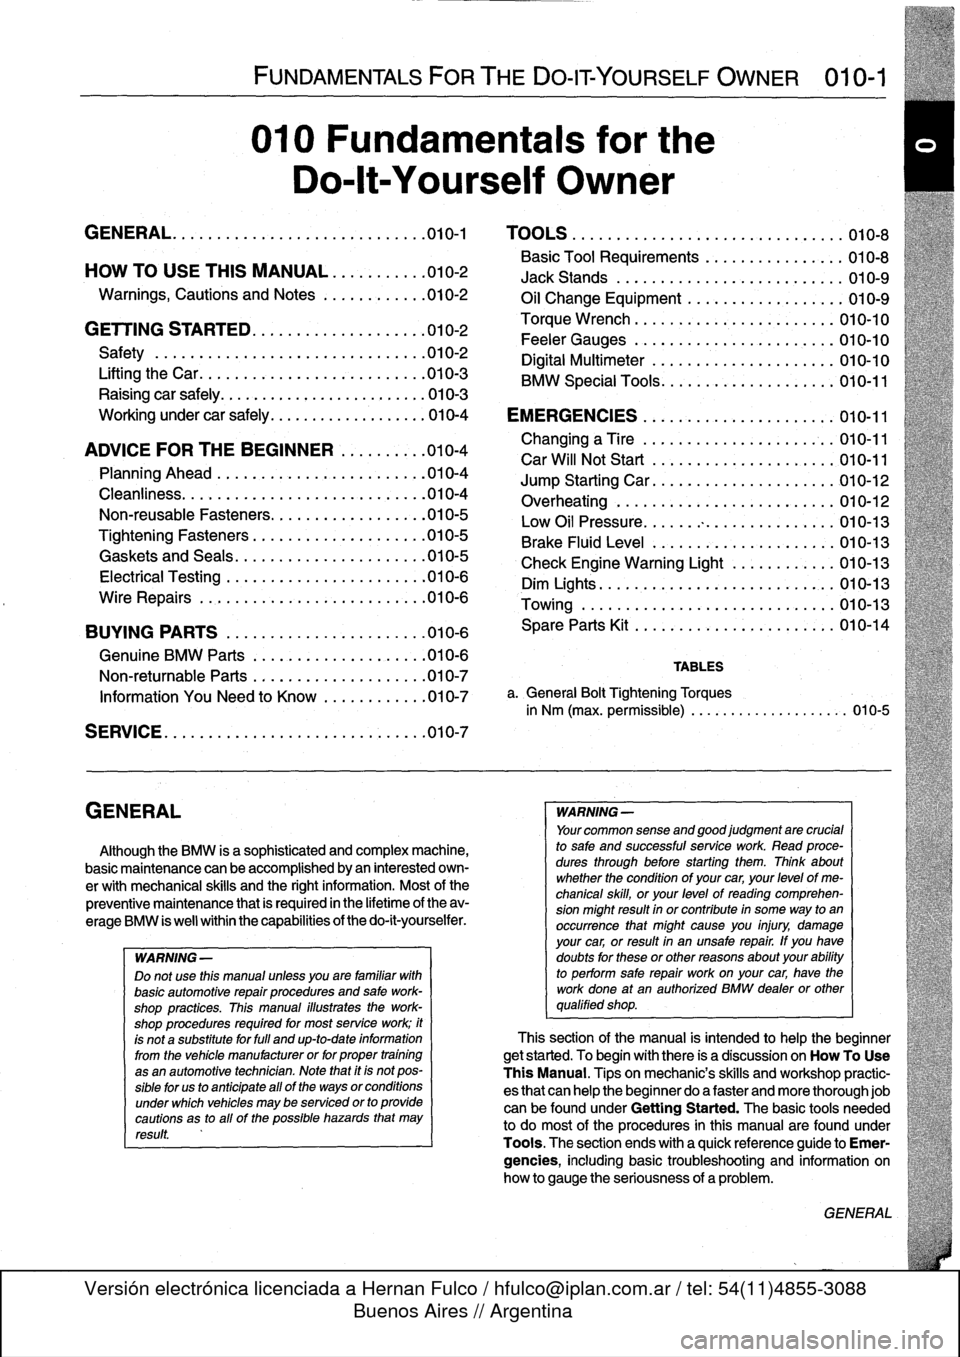 BMW 328i 1995 E36 Workshop Manual 
GENERAL

FUNDAMENTALS
FORTHE
DO-IT
YOURSELF
OWNER

	

010-1

010
Fundamentals
for
the

Do-lt-Yourself
Owner

GENERAL
.......
.
.
.
......
.
.........
.
.
.010-1

	

TOOLS
.
.
...
.
............
.
...